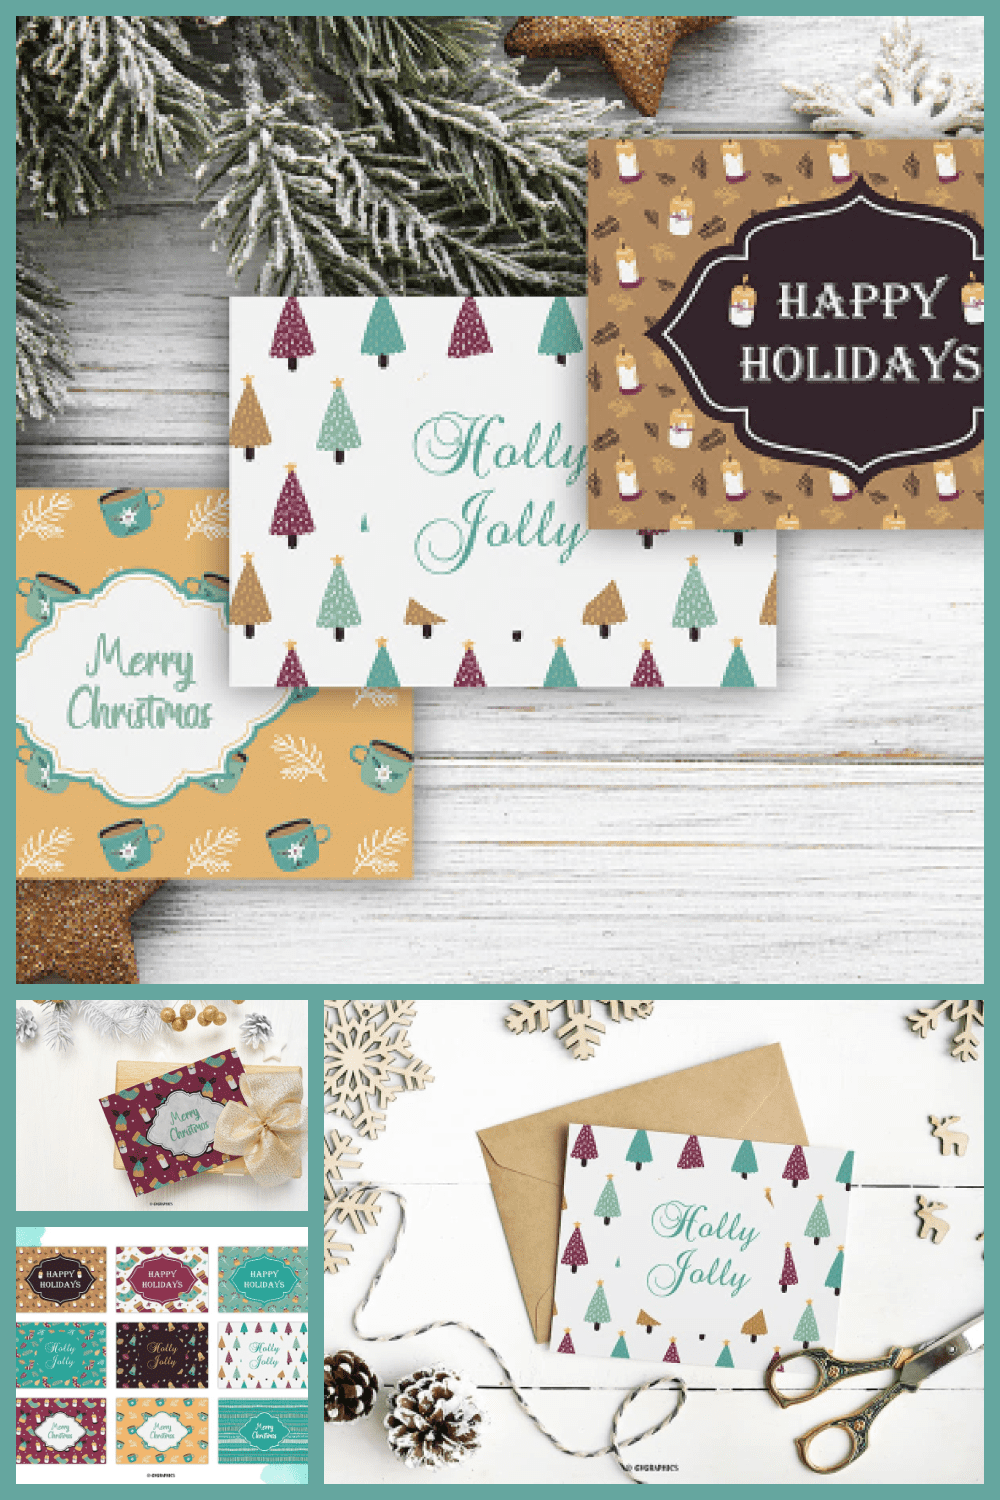 Several Christmas cards on the background of fir branches, scissors, cones and rope.